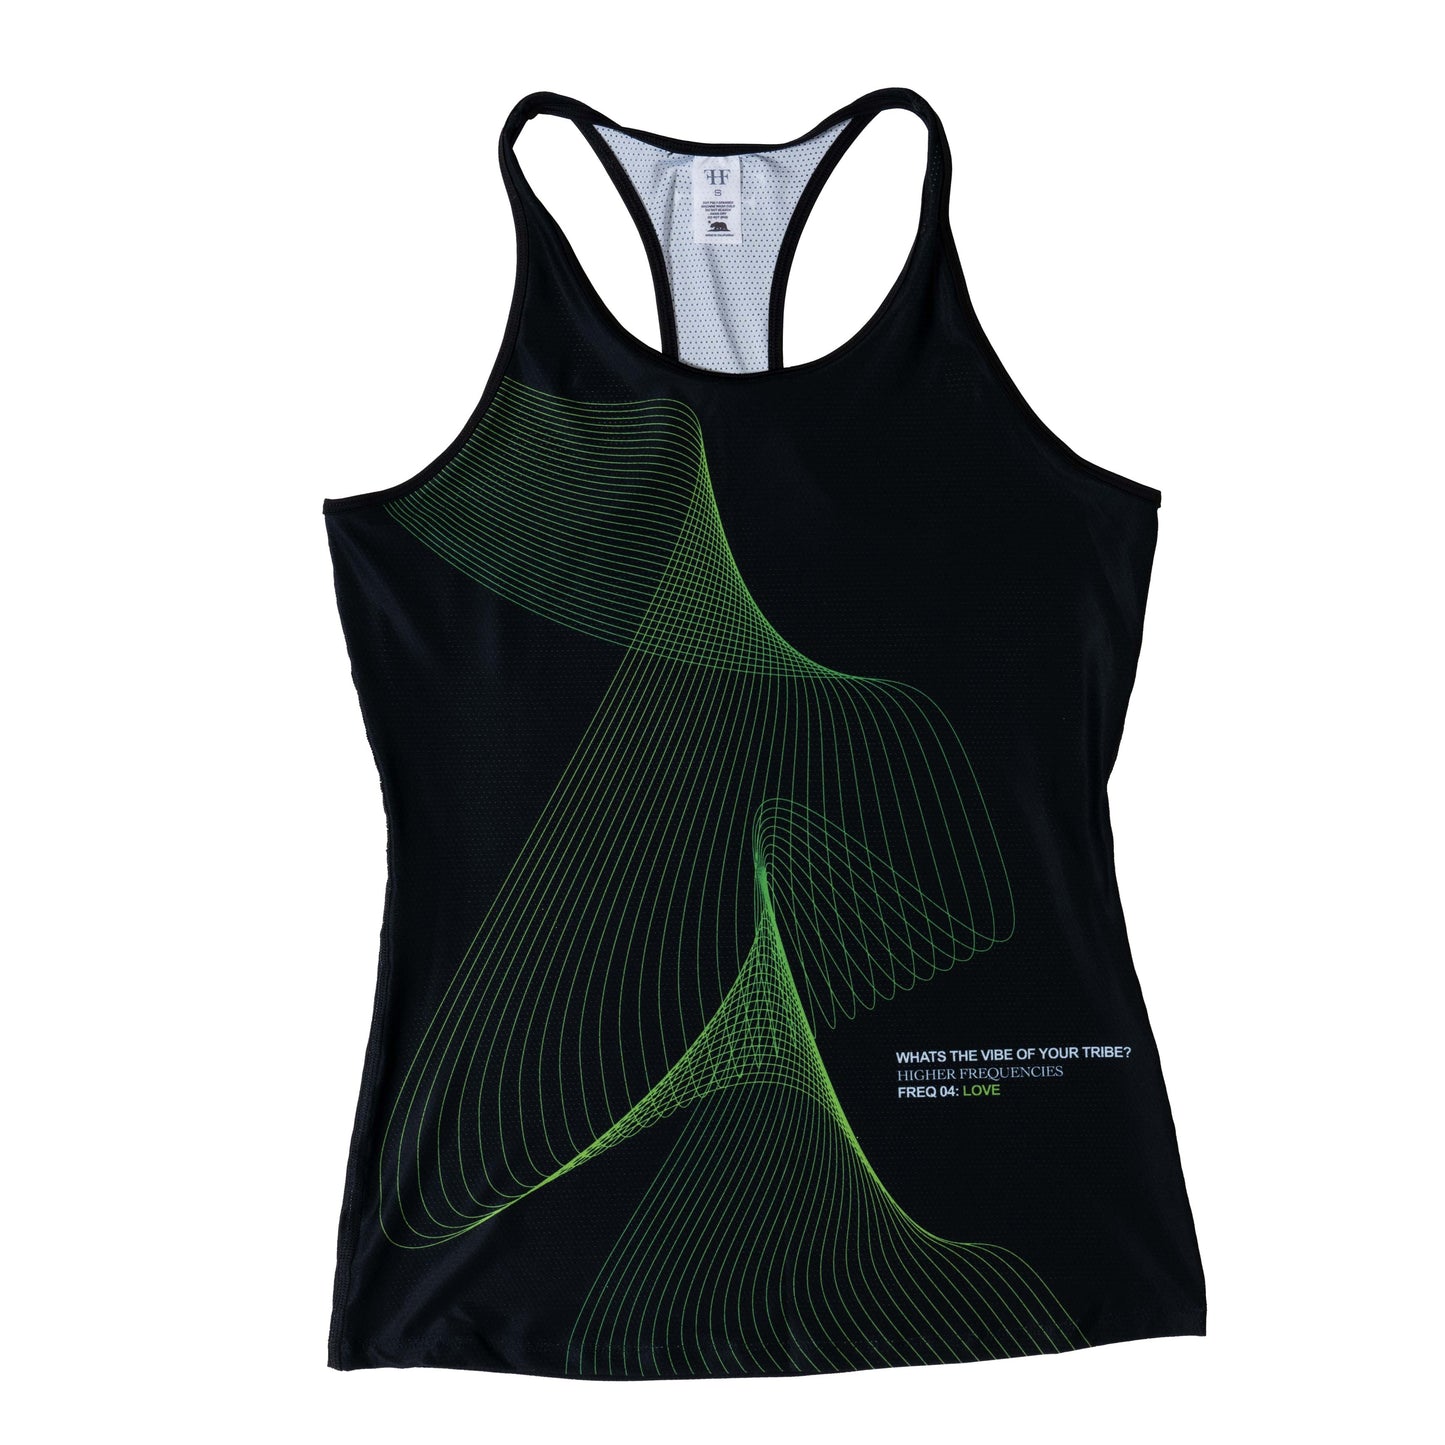 love frequency activewear tank top for women 